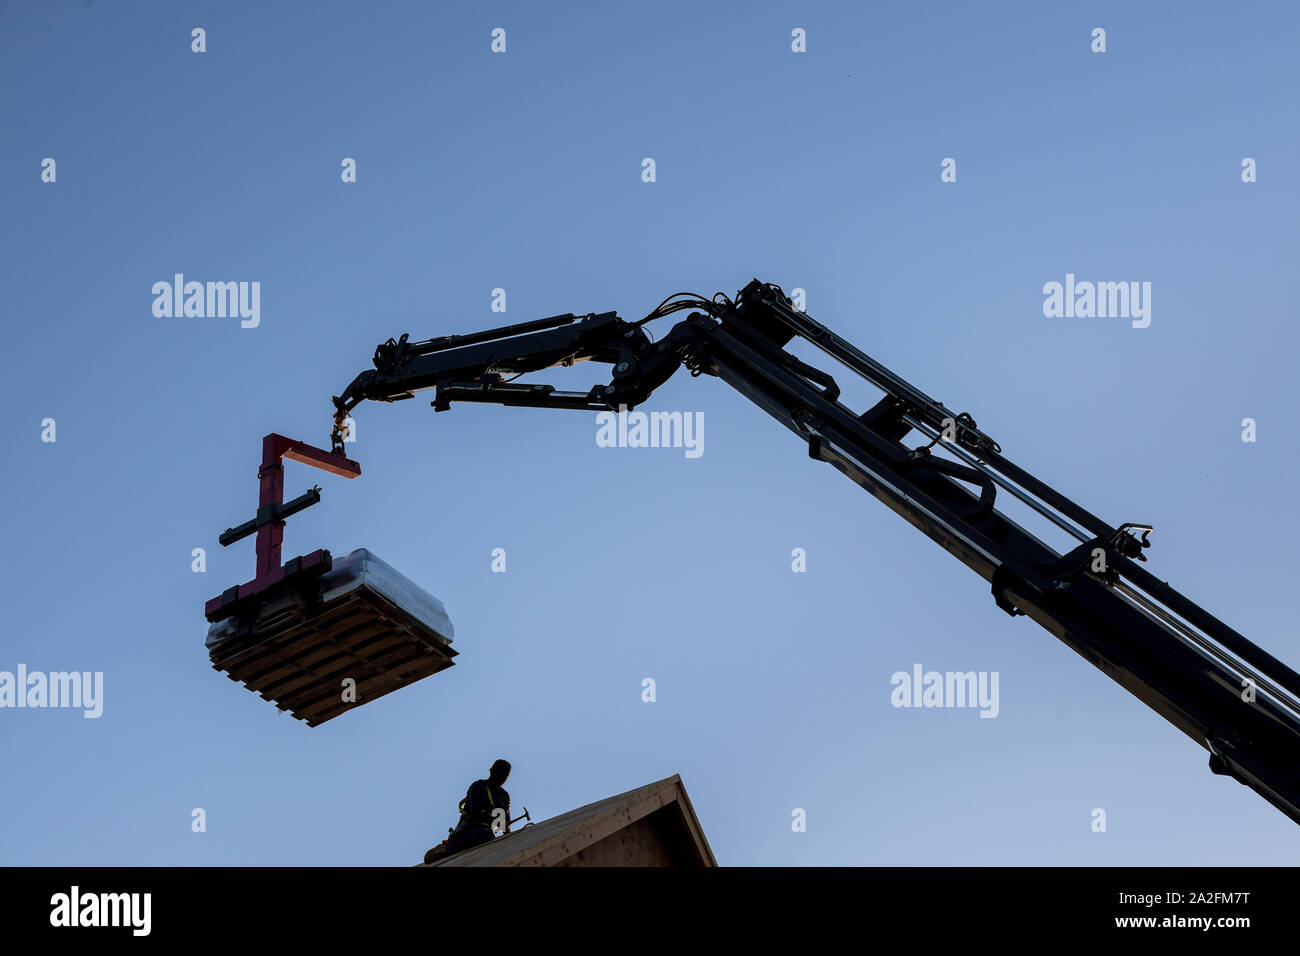 Mobile boom truck forklift delivering materials to rooftop preparing to raise construction parts Stock Photo